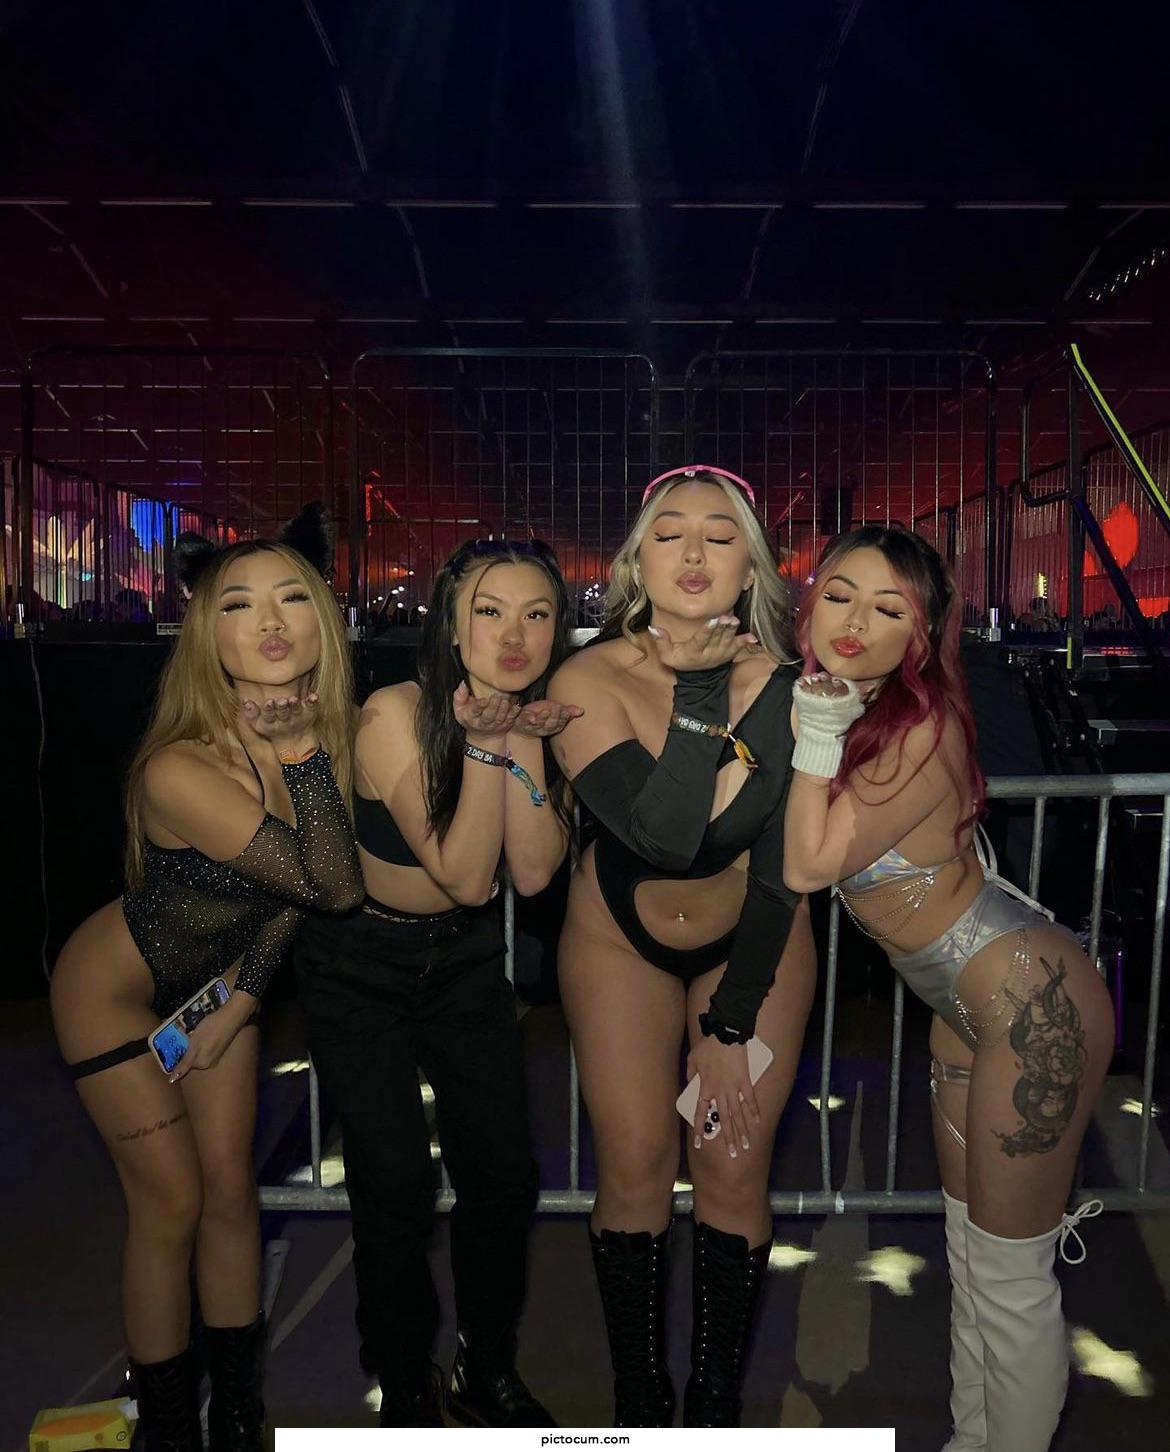 which rave slut are you face fucking then bending over on the rail?